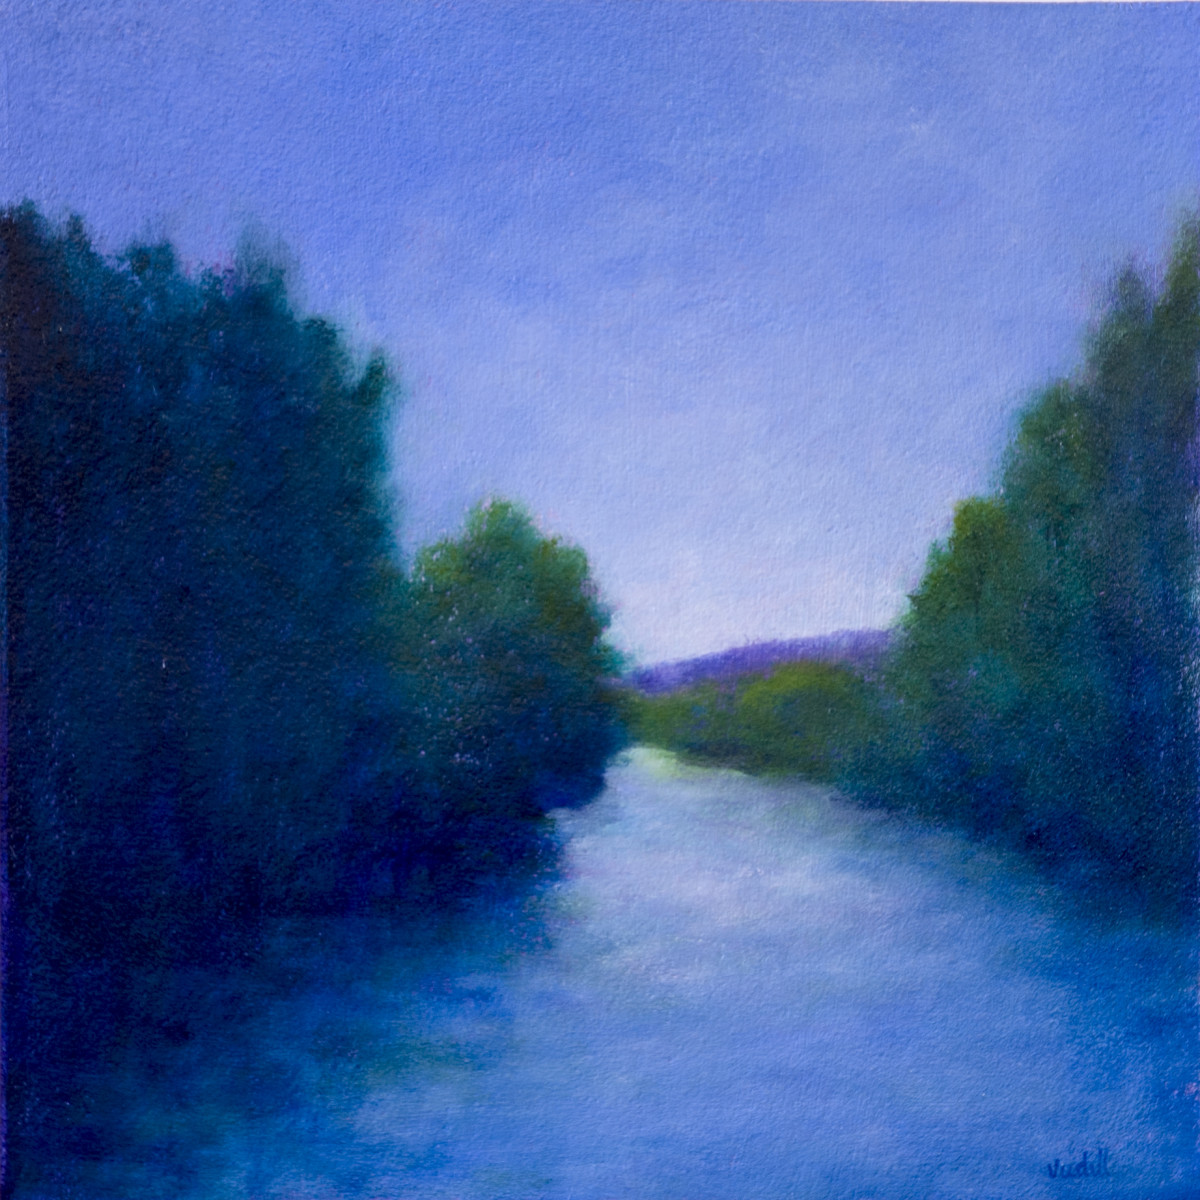 Evening on the Russian River by Victoria Veedell 